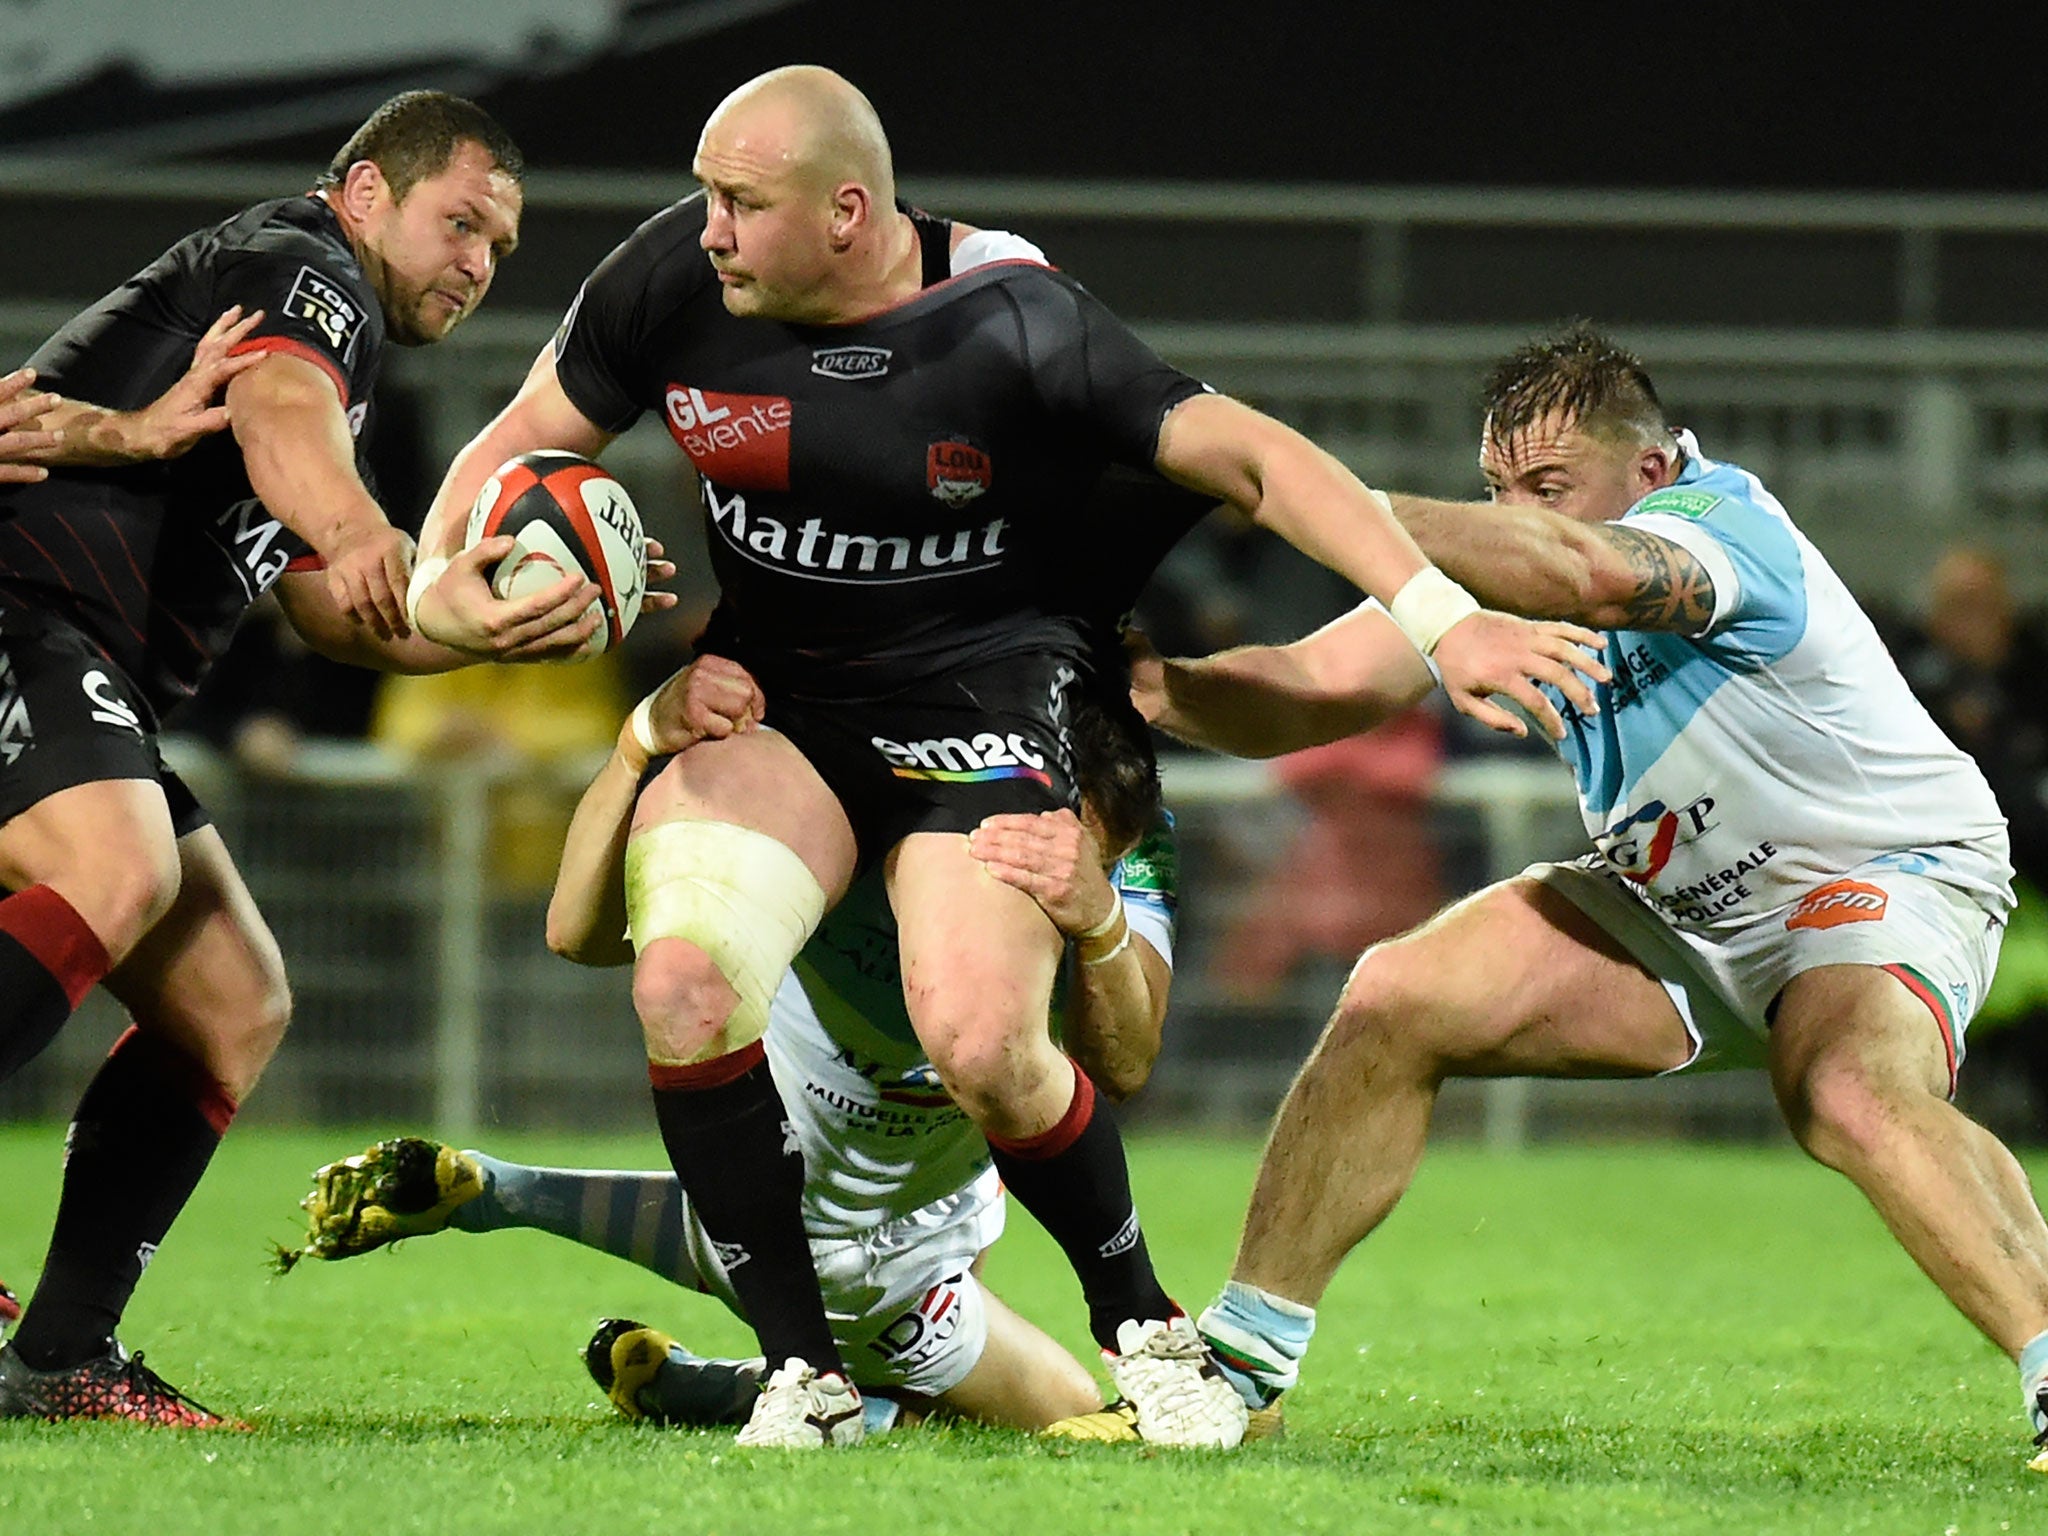 Carl Fearns will become a Gloucester player next season after signing a 'long-term contract'